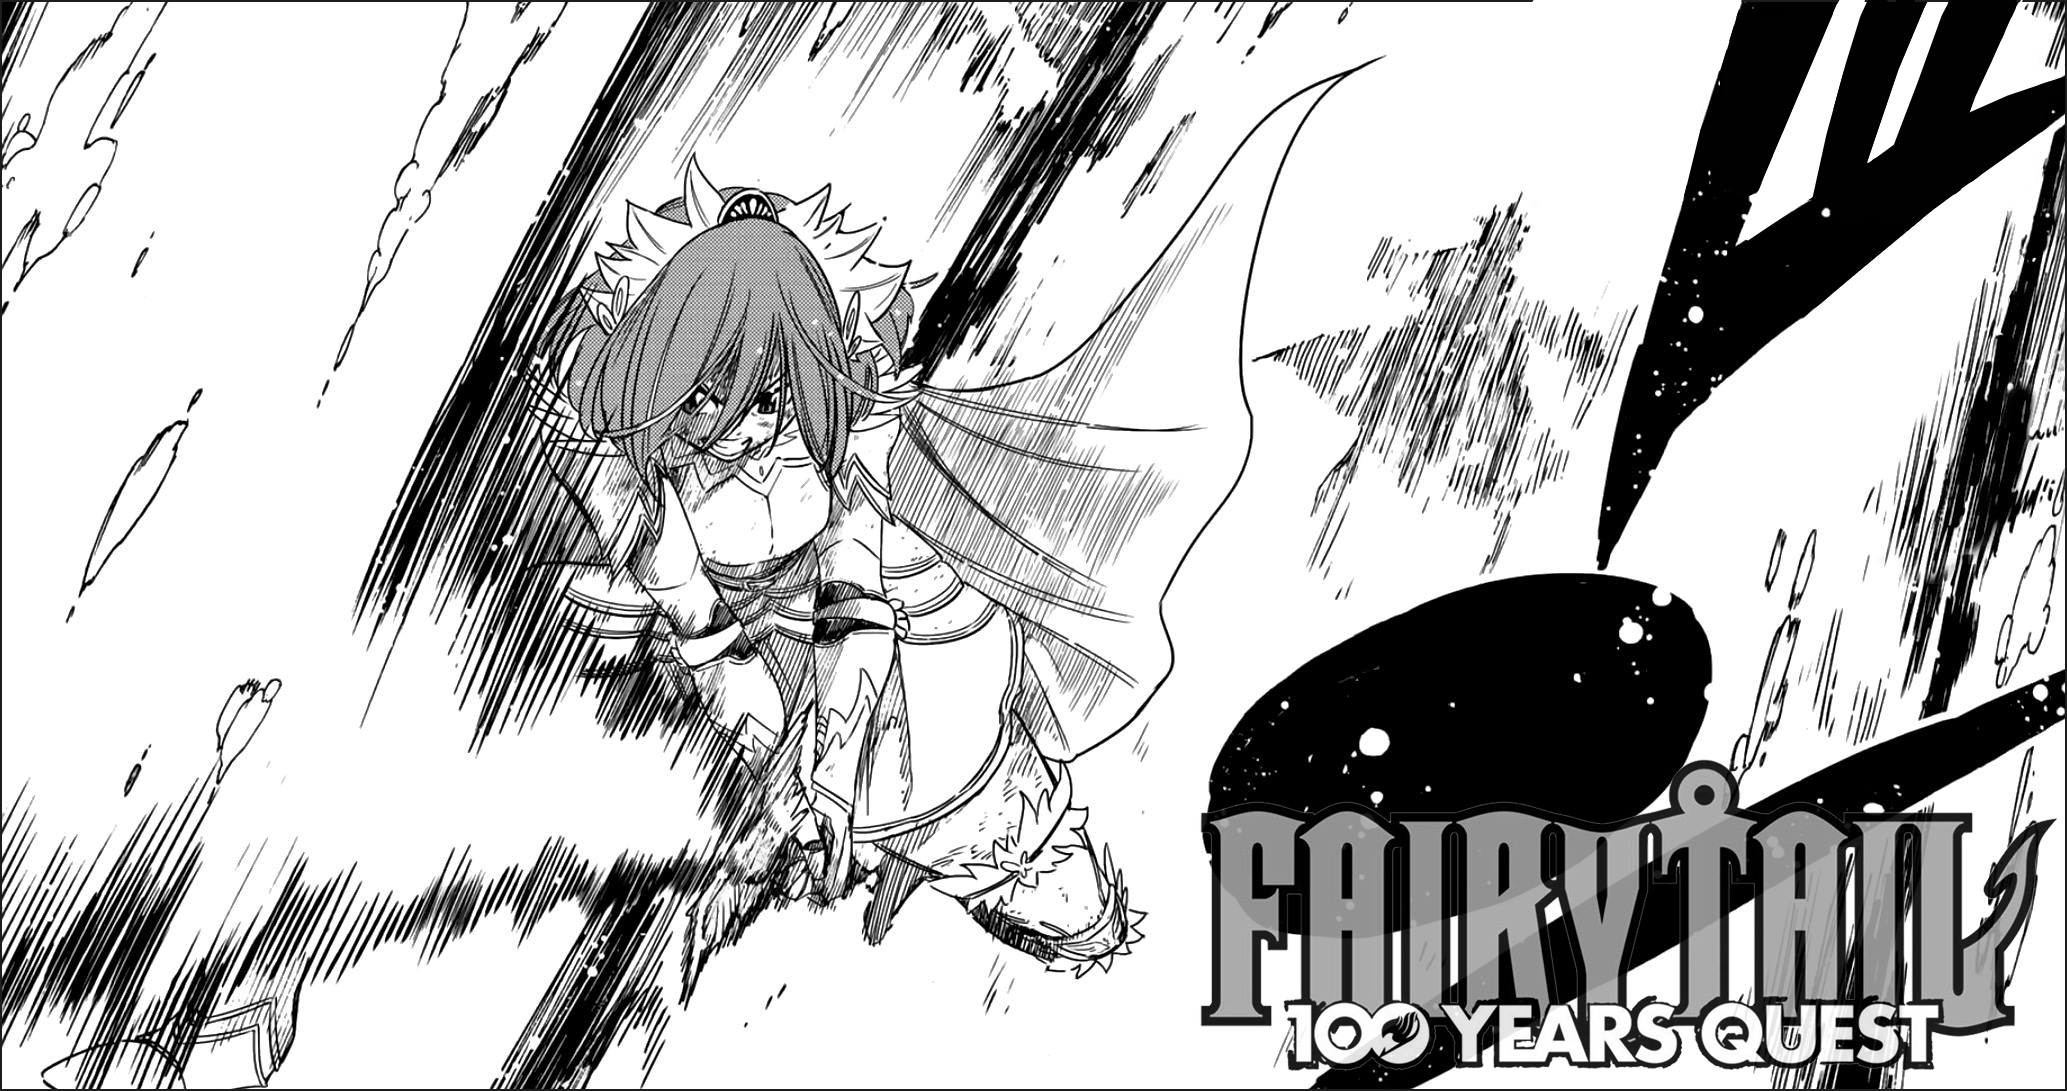 Fairy Tail: 100 Years Quest Chapter 105 - Erza channels Jellal through her attack